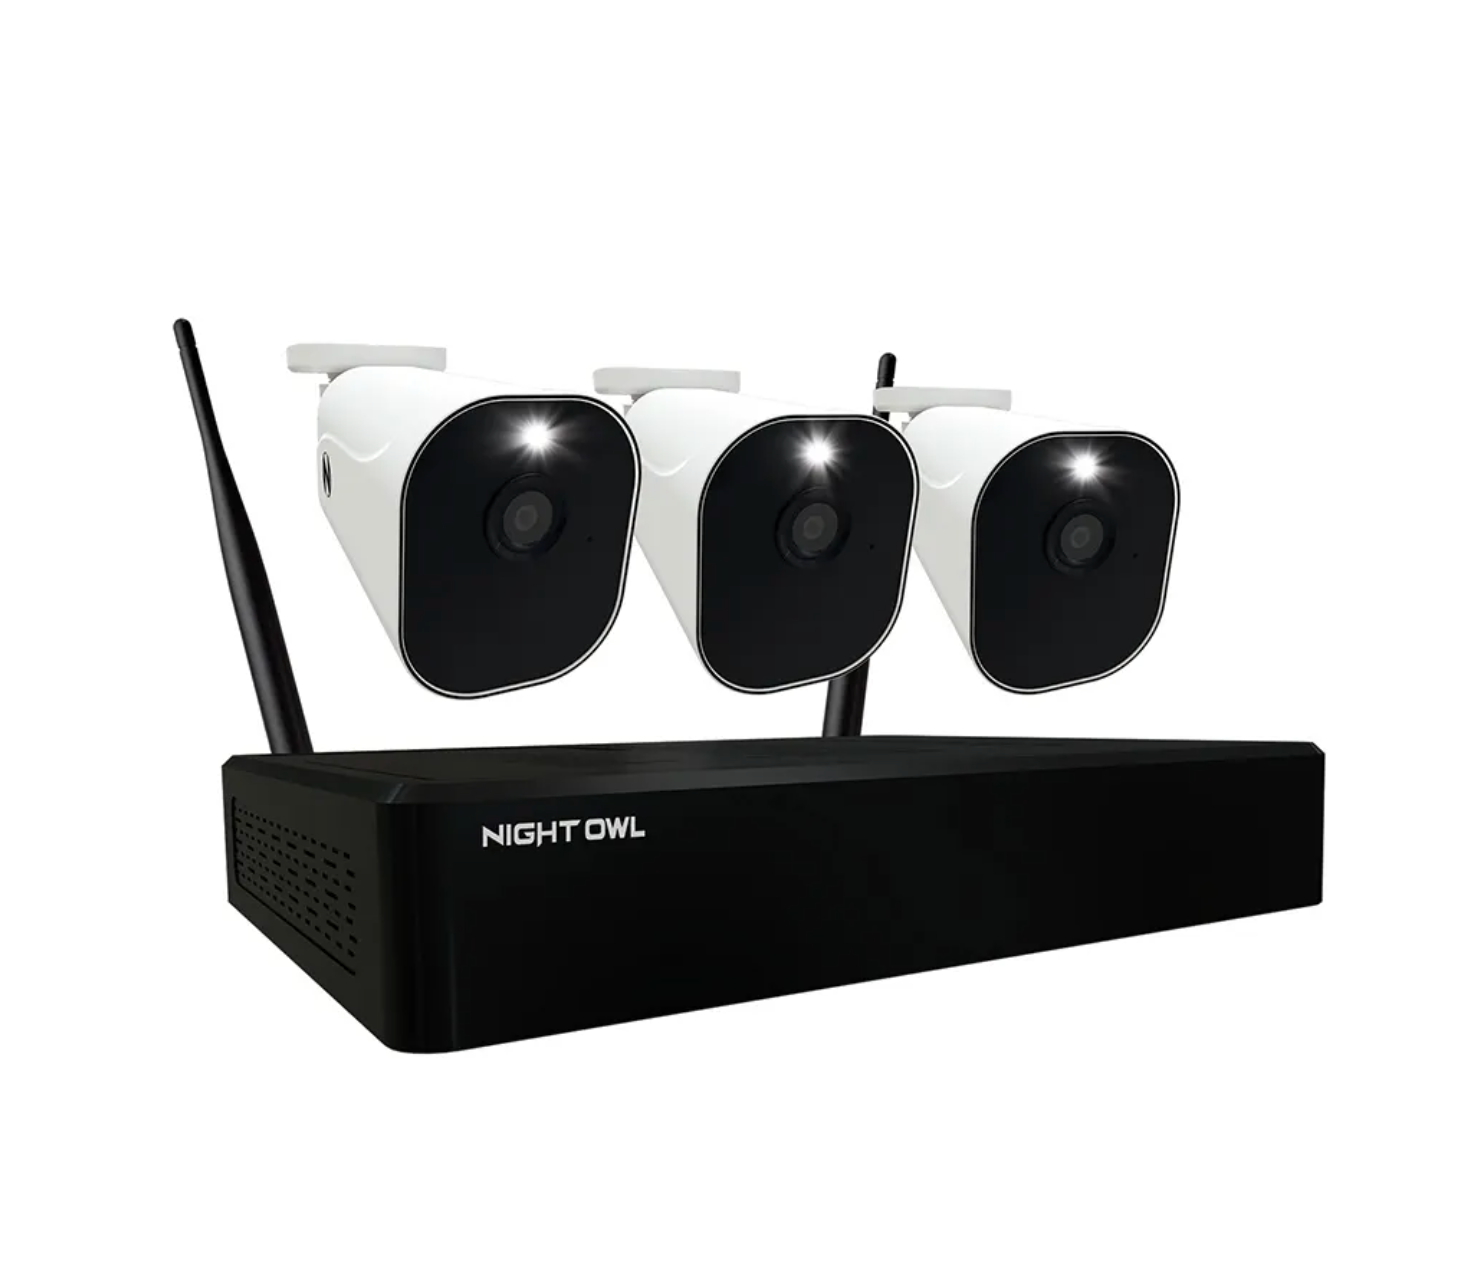 Ultra long distance 8-Channel 1080P NVR Wireless Security Camera System 2TB  HDD with 4PCS Weatherproof Two-Way Audio Cameras